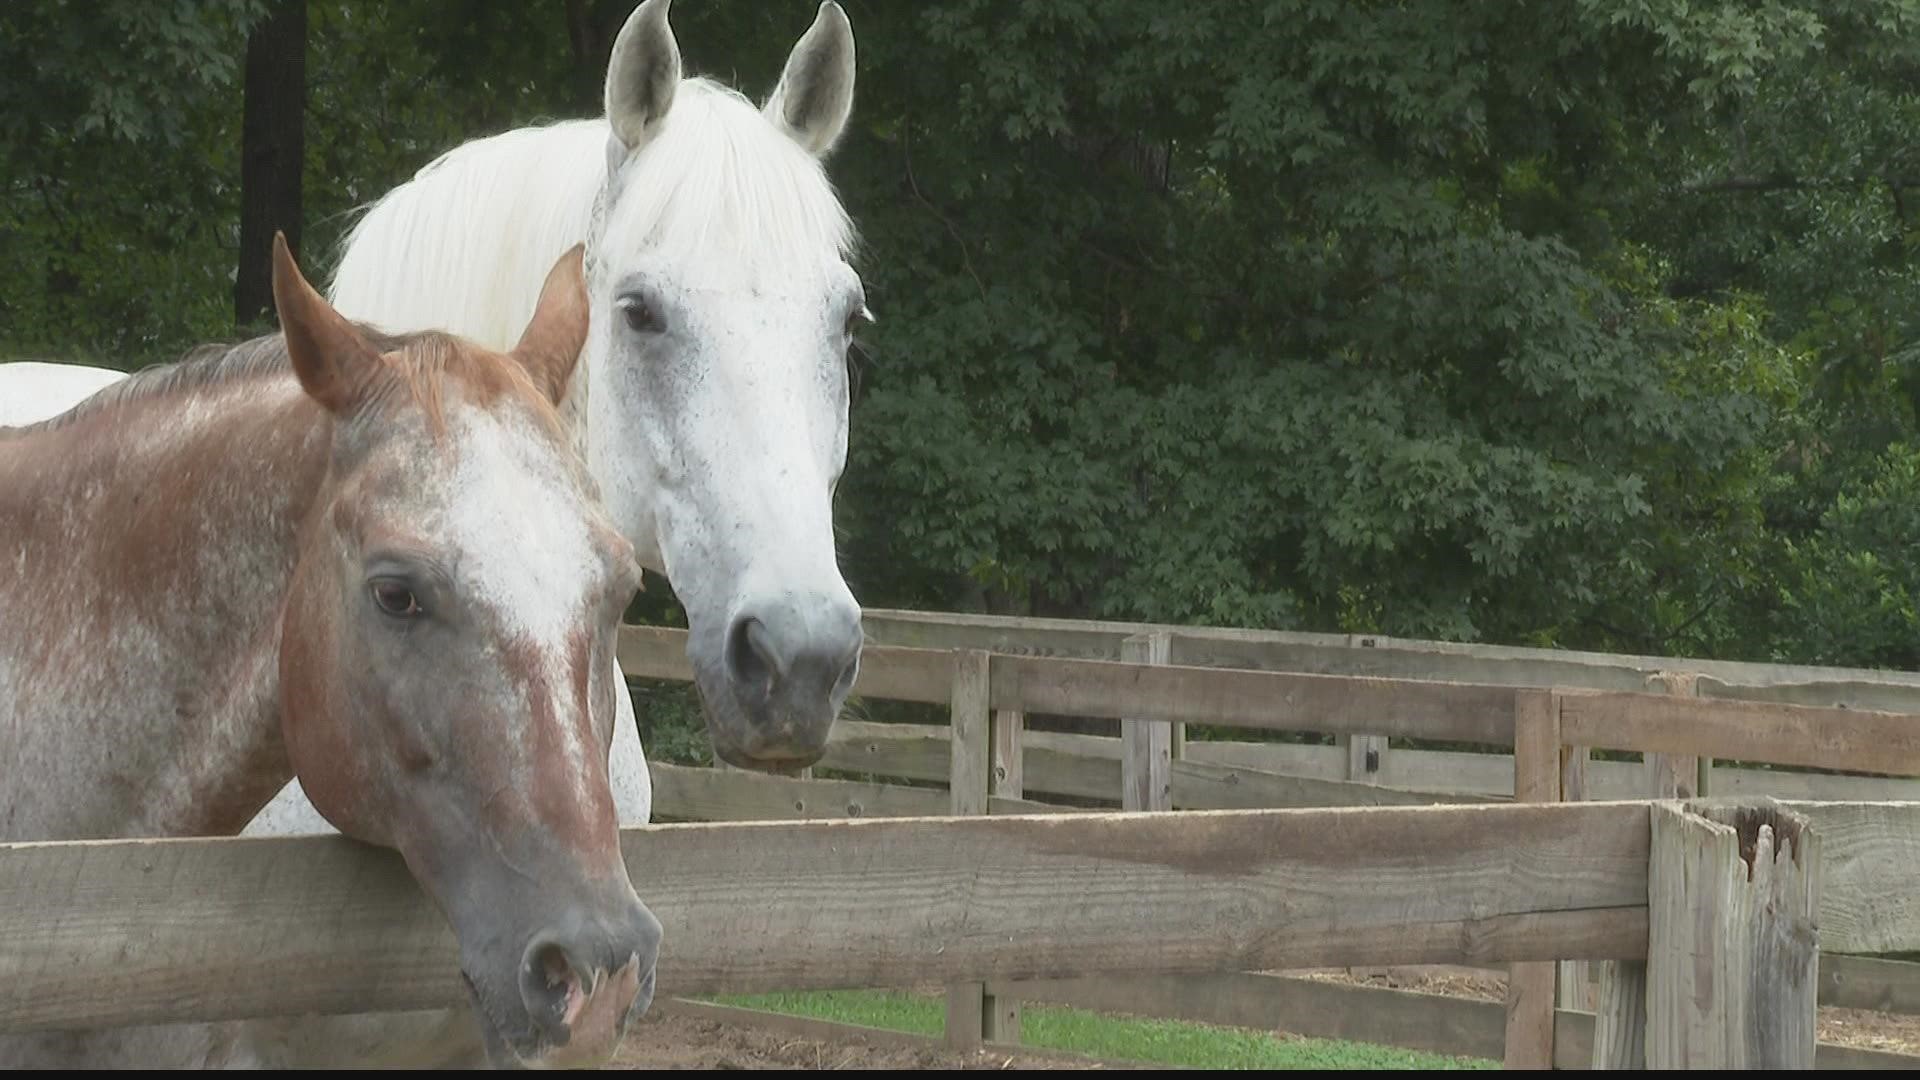 Leaders broke ground for its Healing Through Horses campaign.